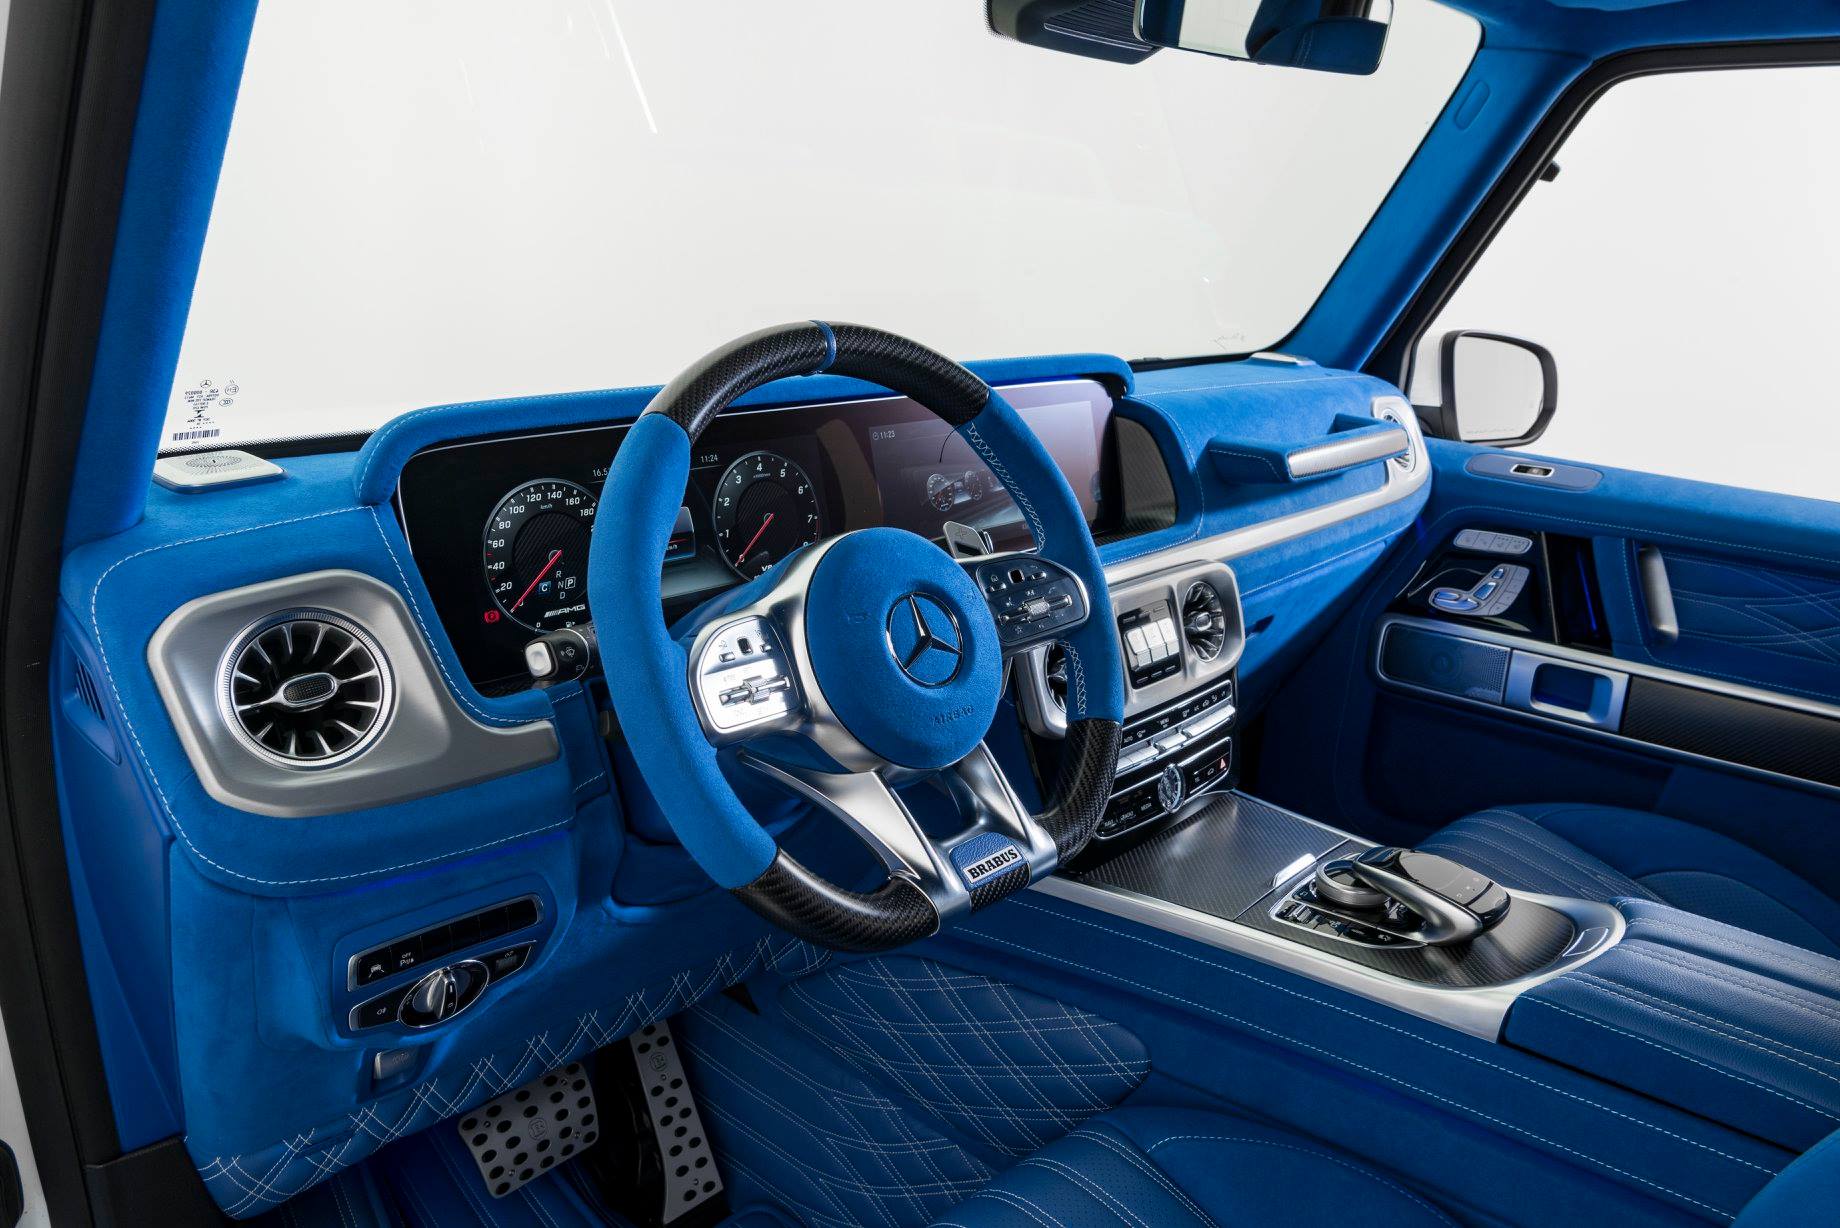 g63 amg brabus mercedes interior leather looks amazing class cars kit package luxury autoevolution nothing its